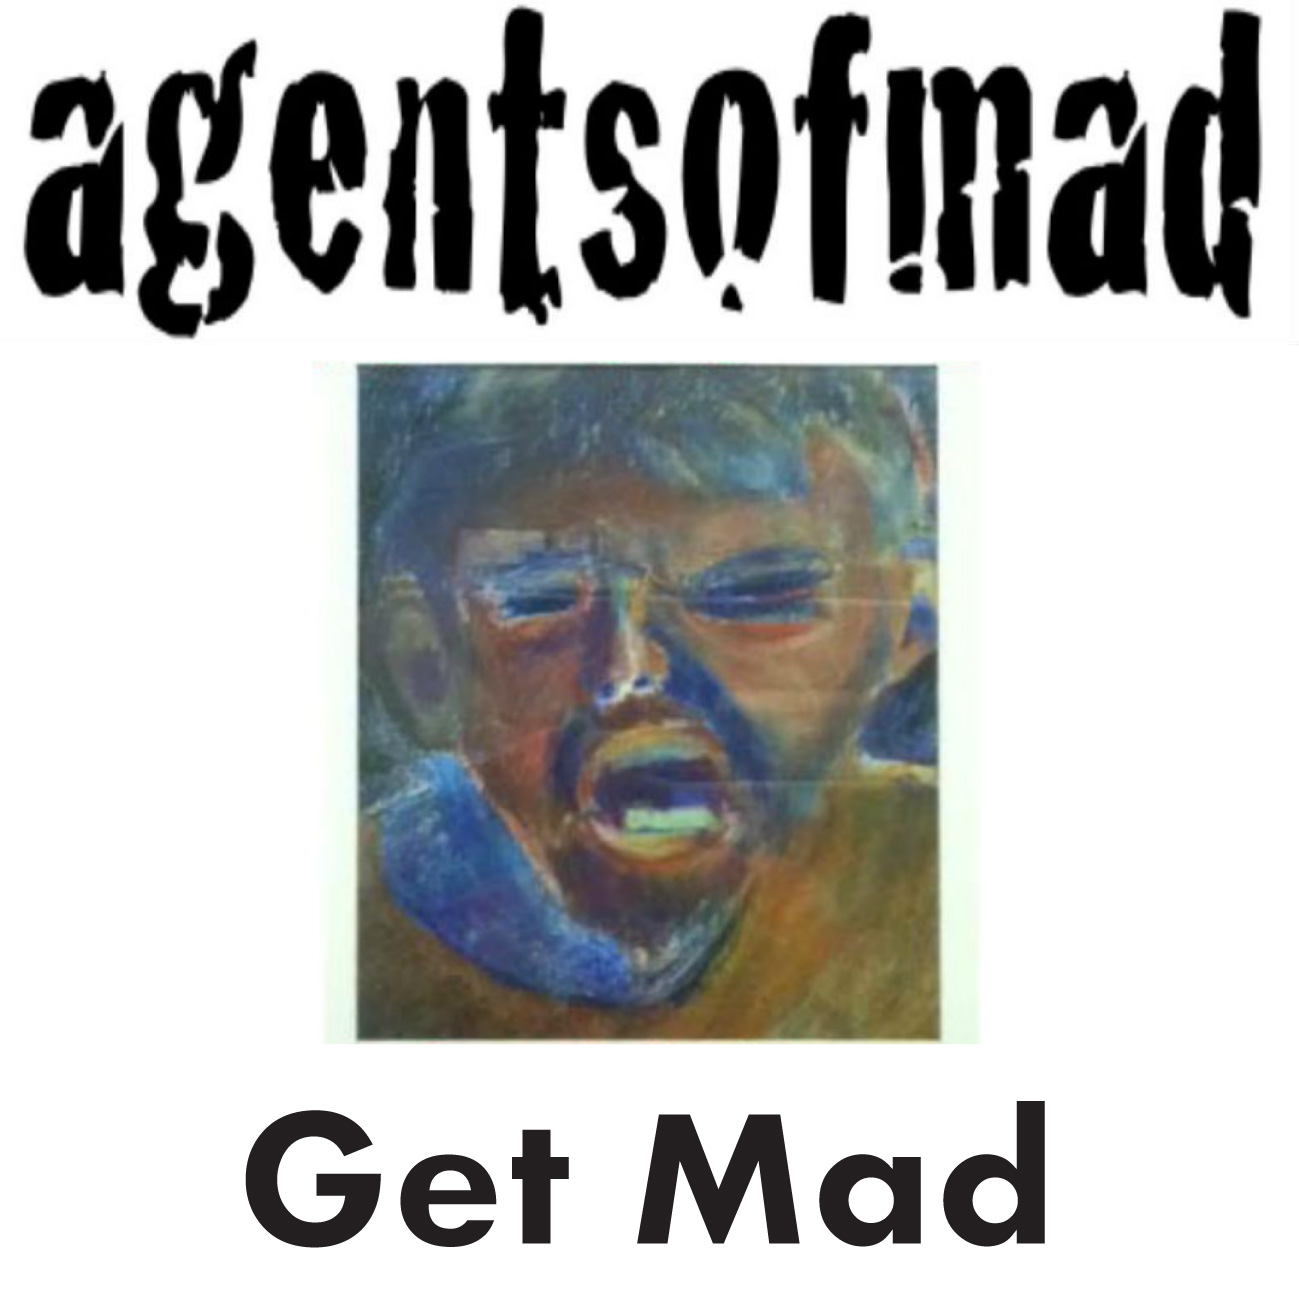 agentsofmad Get Mad EP CD Cover